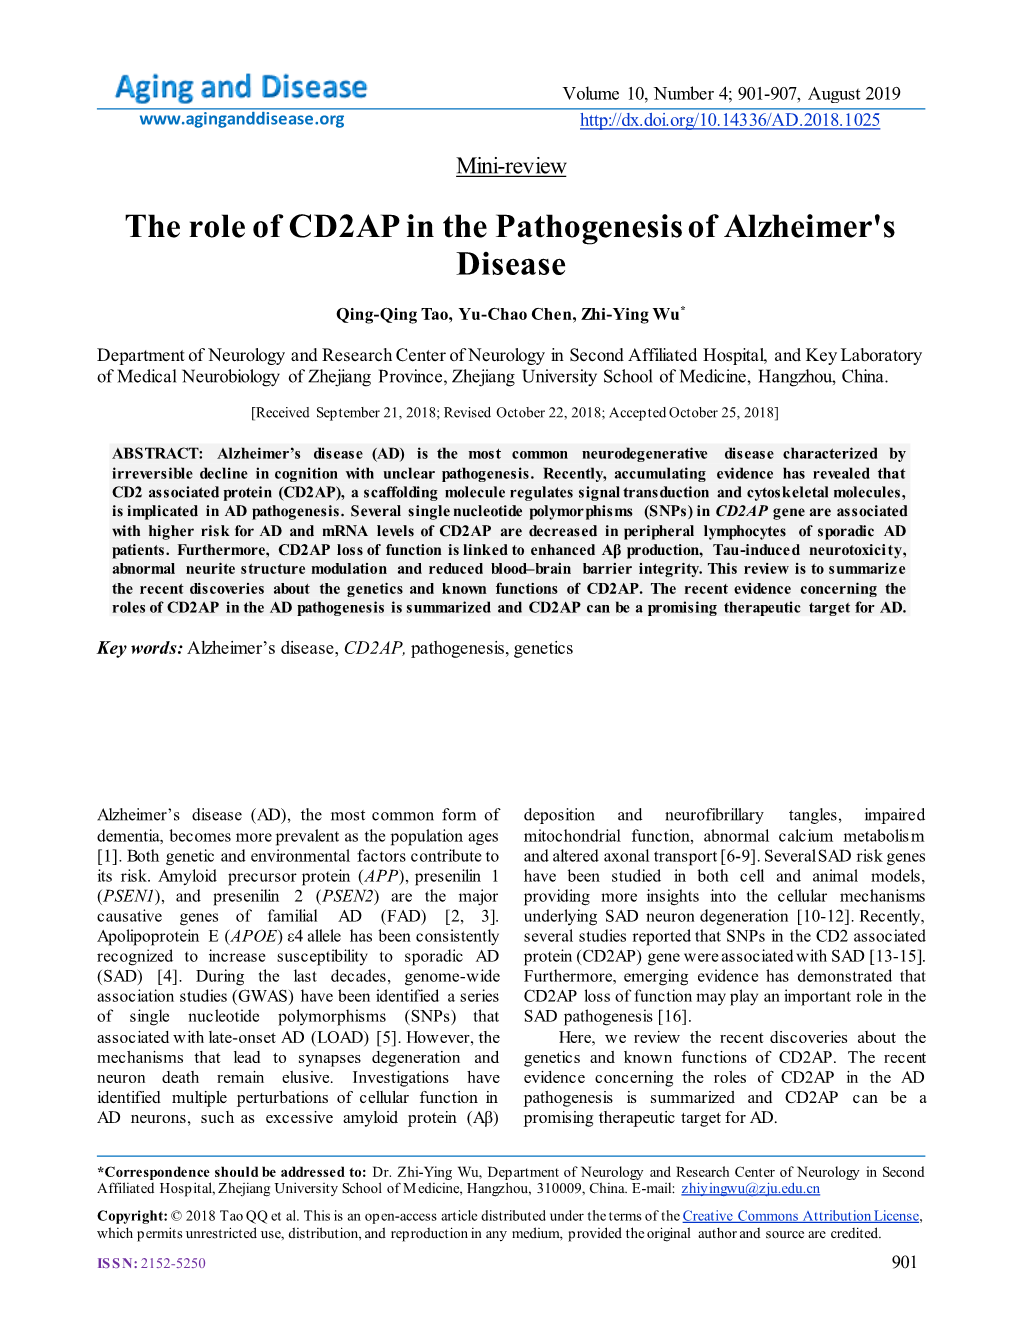 The Role of Cd2apin the Pathogenesis of Alzheimer's Disease